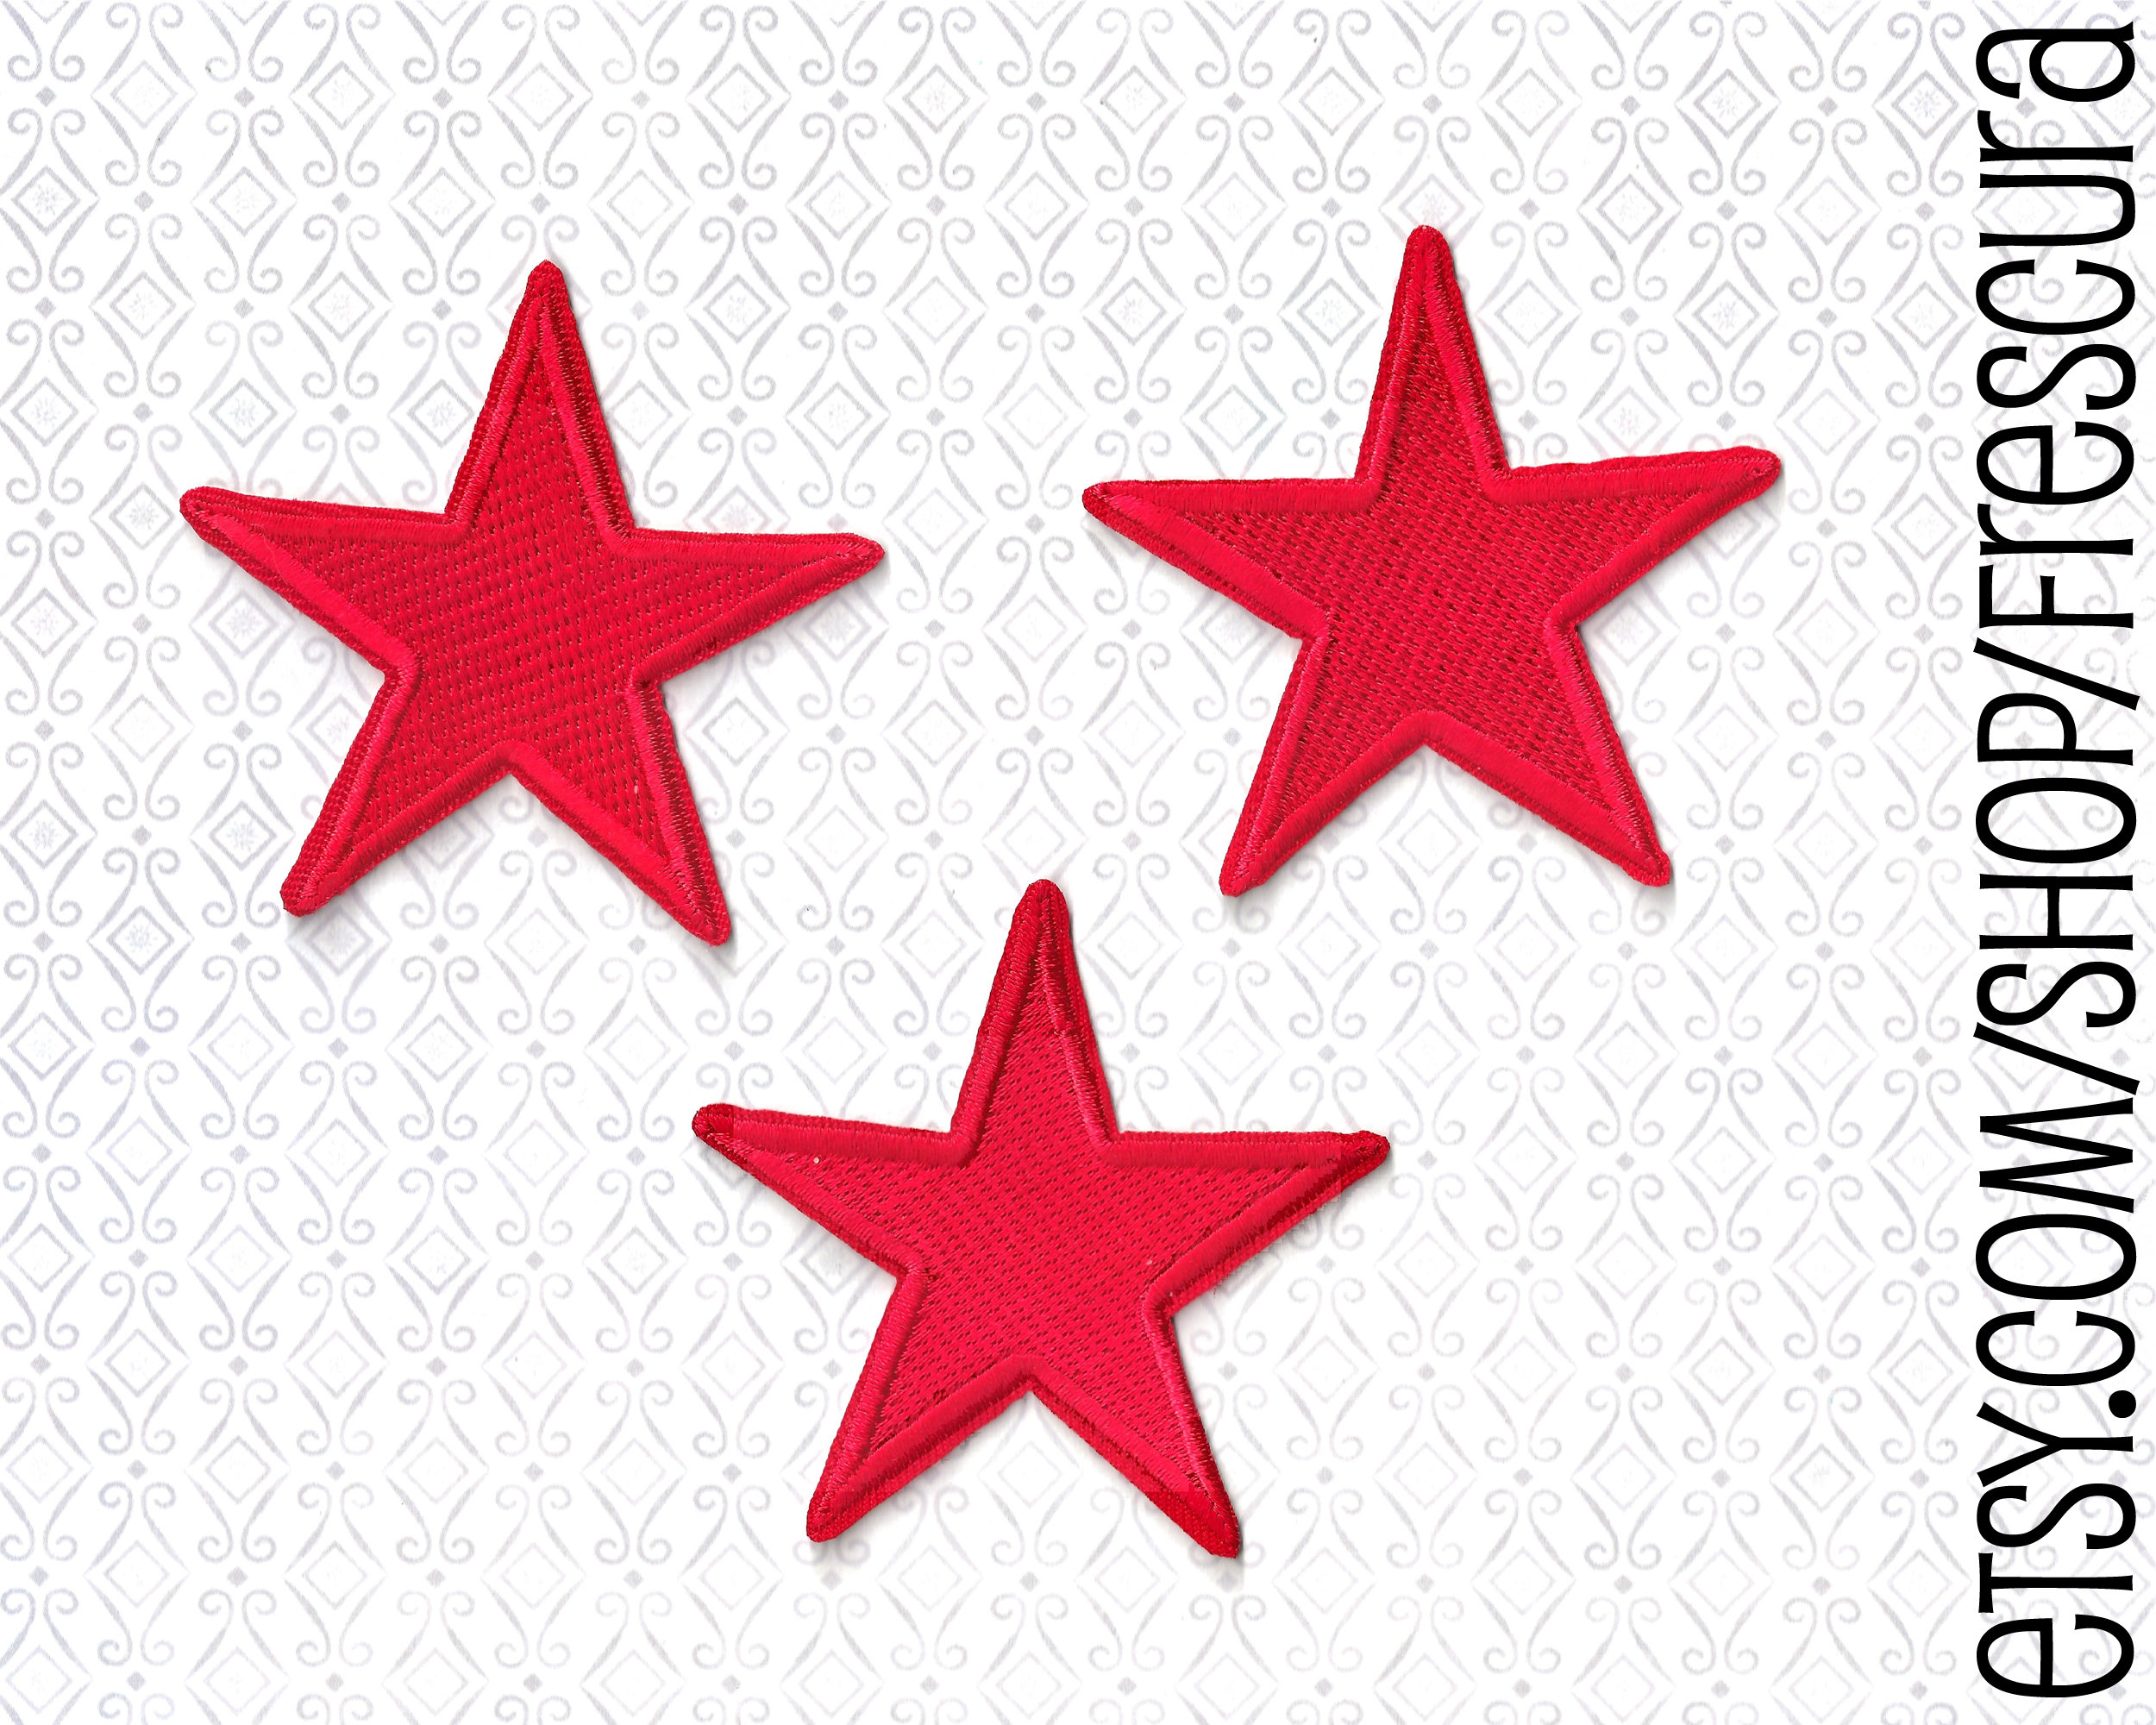 yellow and red star patches! : r/sewing